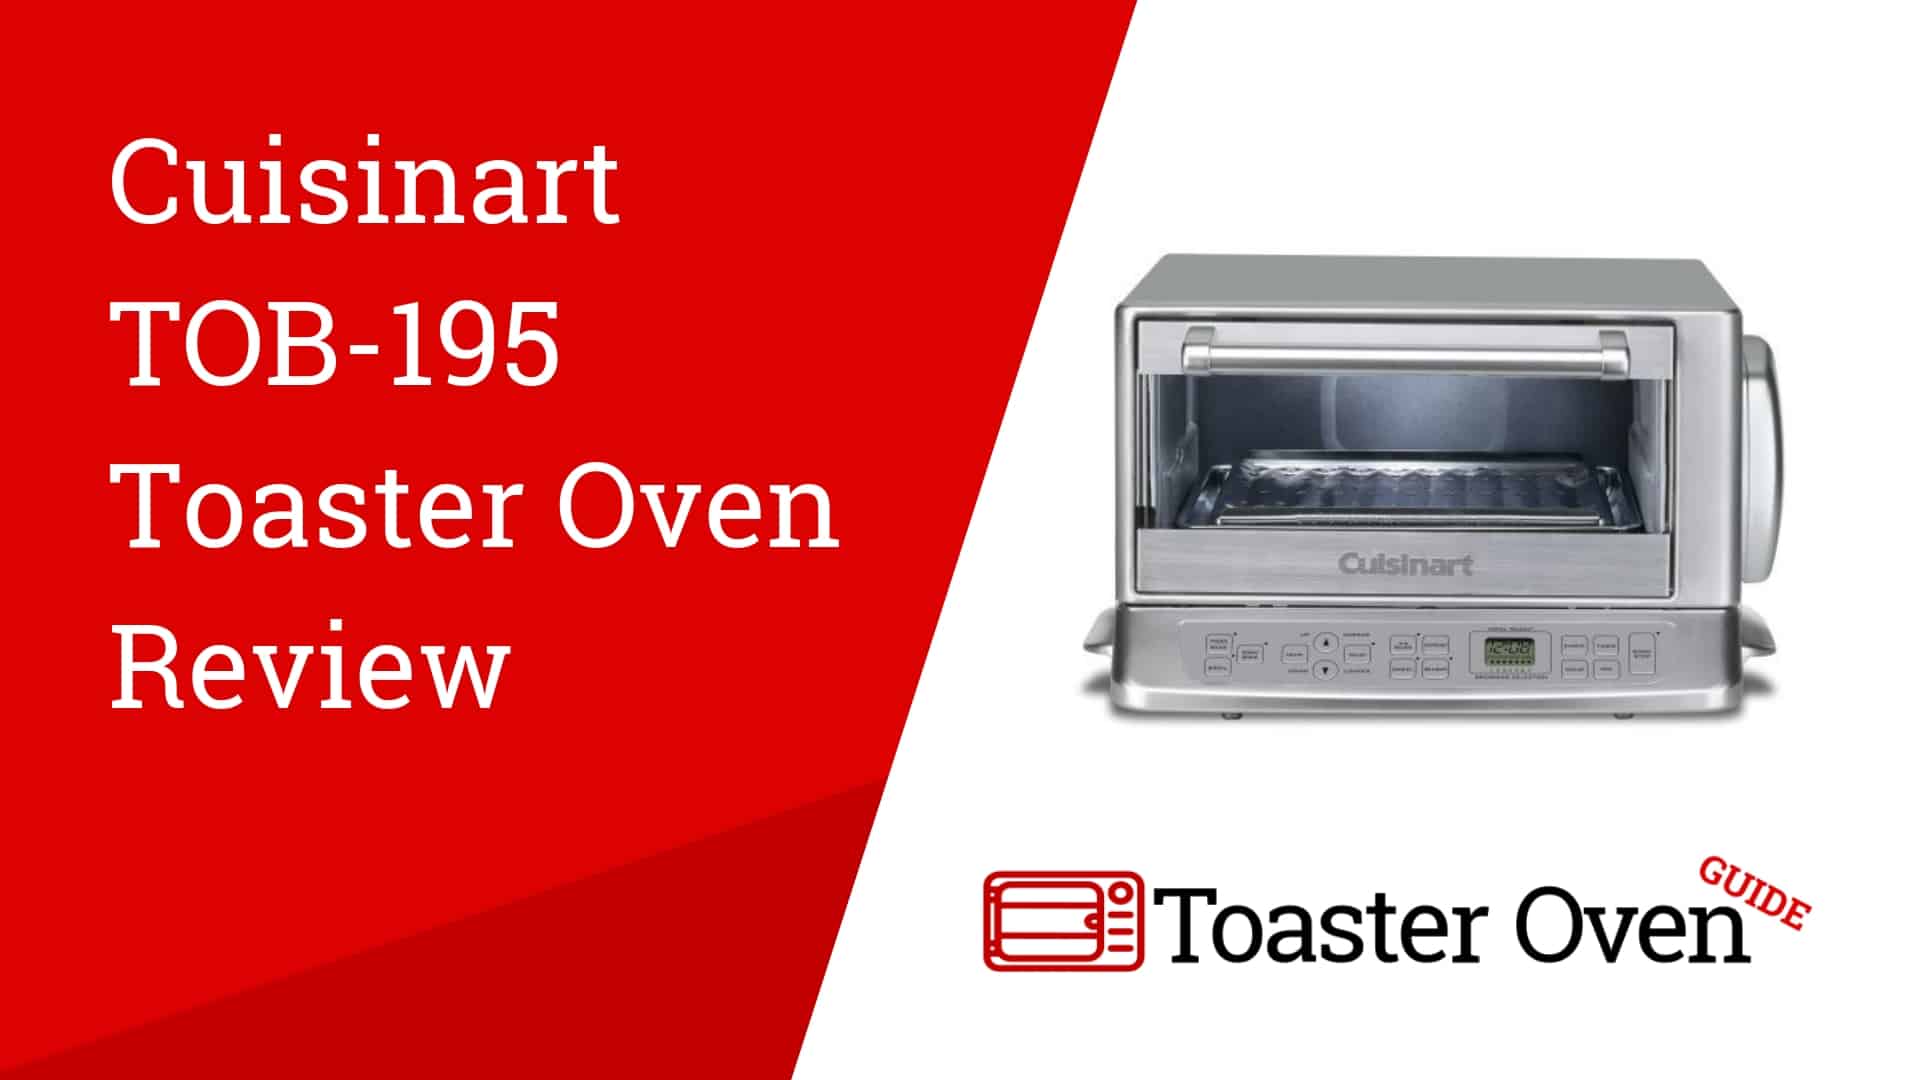 Cuisinart TOB-195 Toaster Oven Review